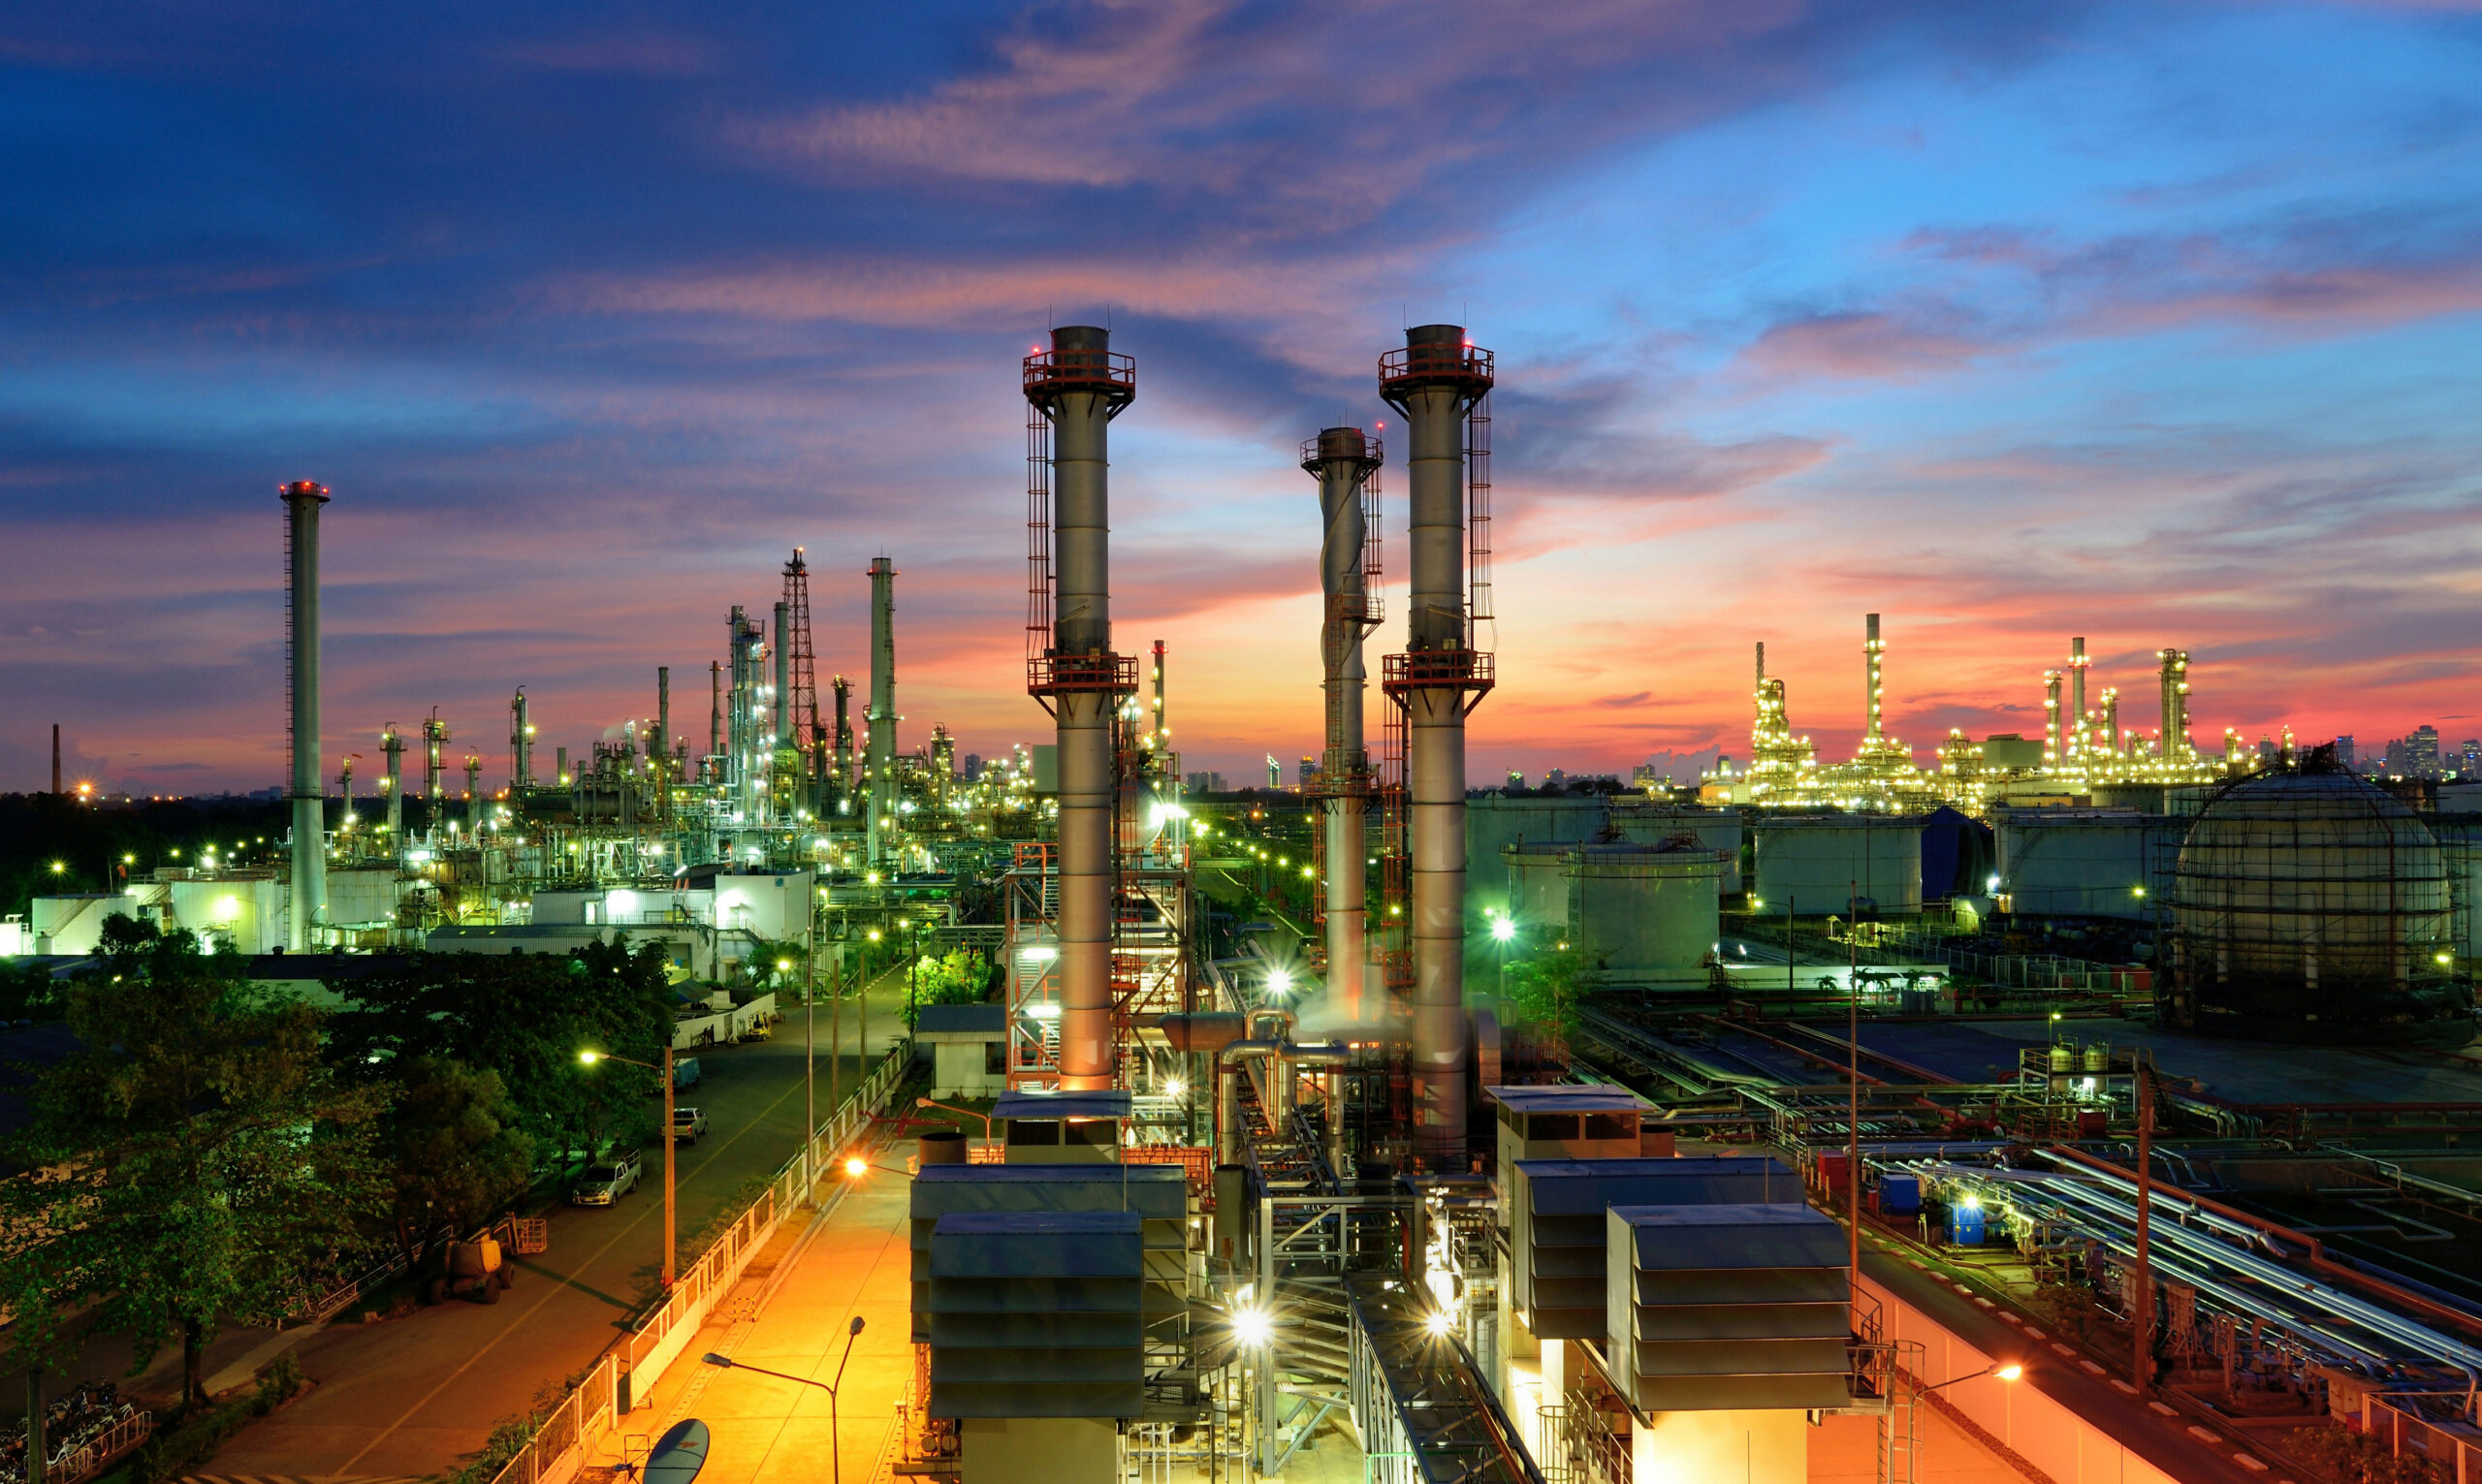 Oil,Refinery,Plant,At,Sunset,,The,Night,View,Of,Petroleum